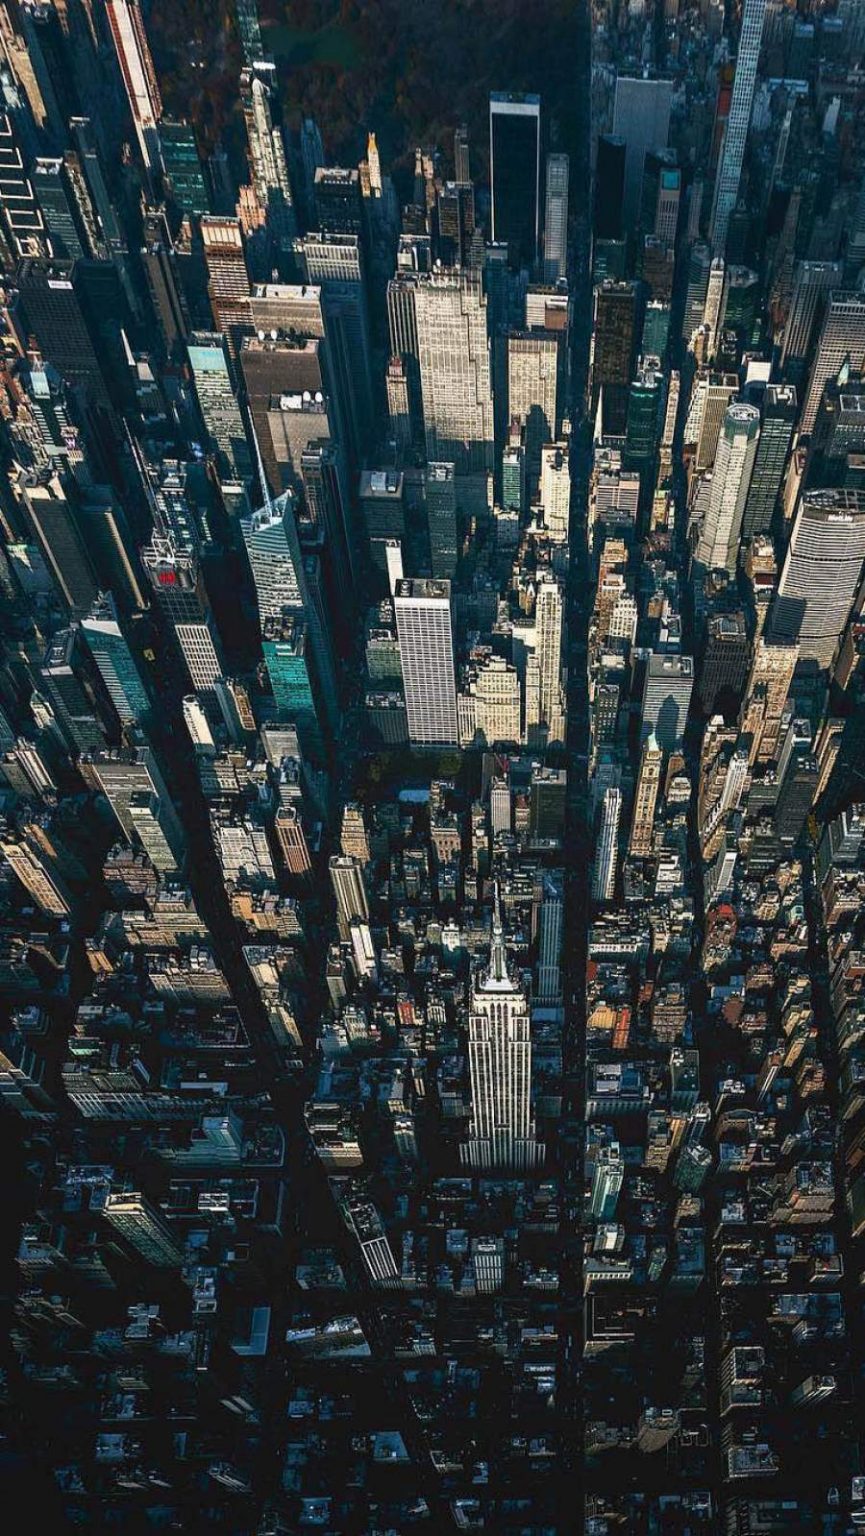 New York Aerial View IPhone Wallpaper - IPhone Wallpapers : iPhone ...